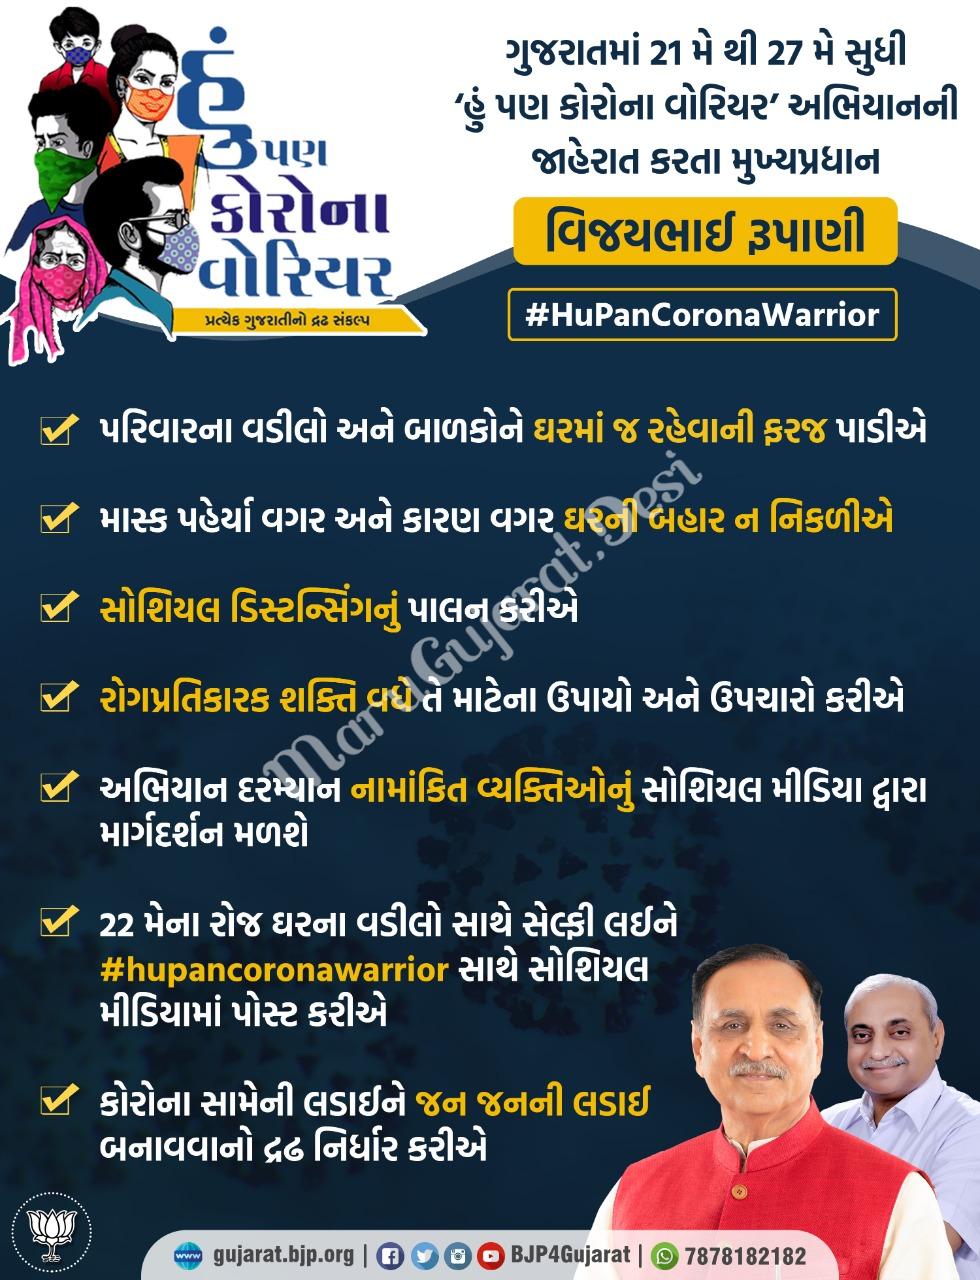 cm-vijay-rupani-started-i-am-also-a-corona-warrior-campaign-will-last-for-a-week